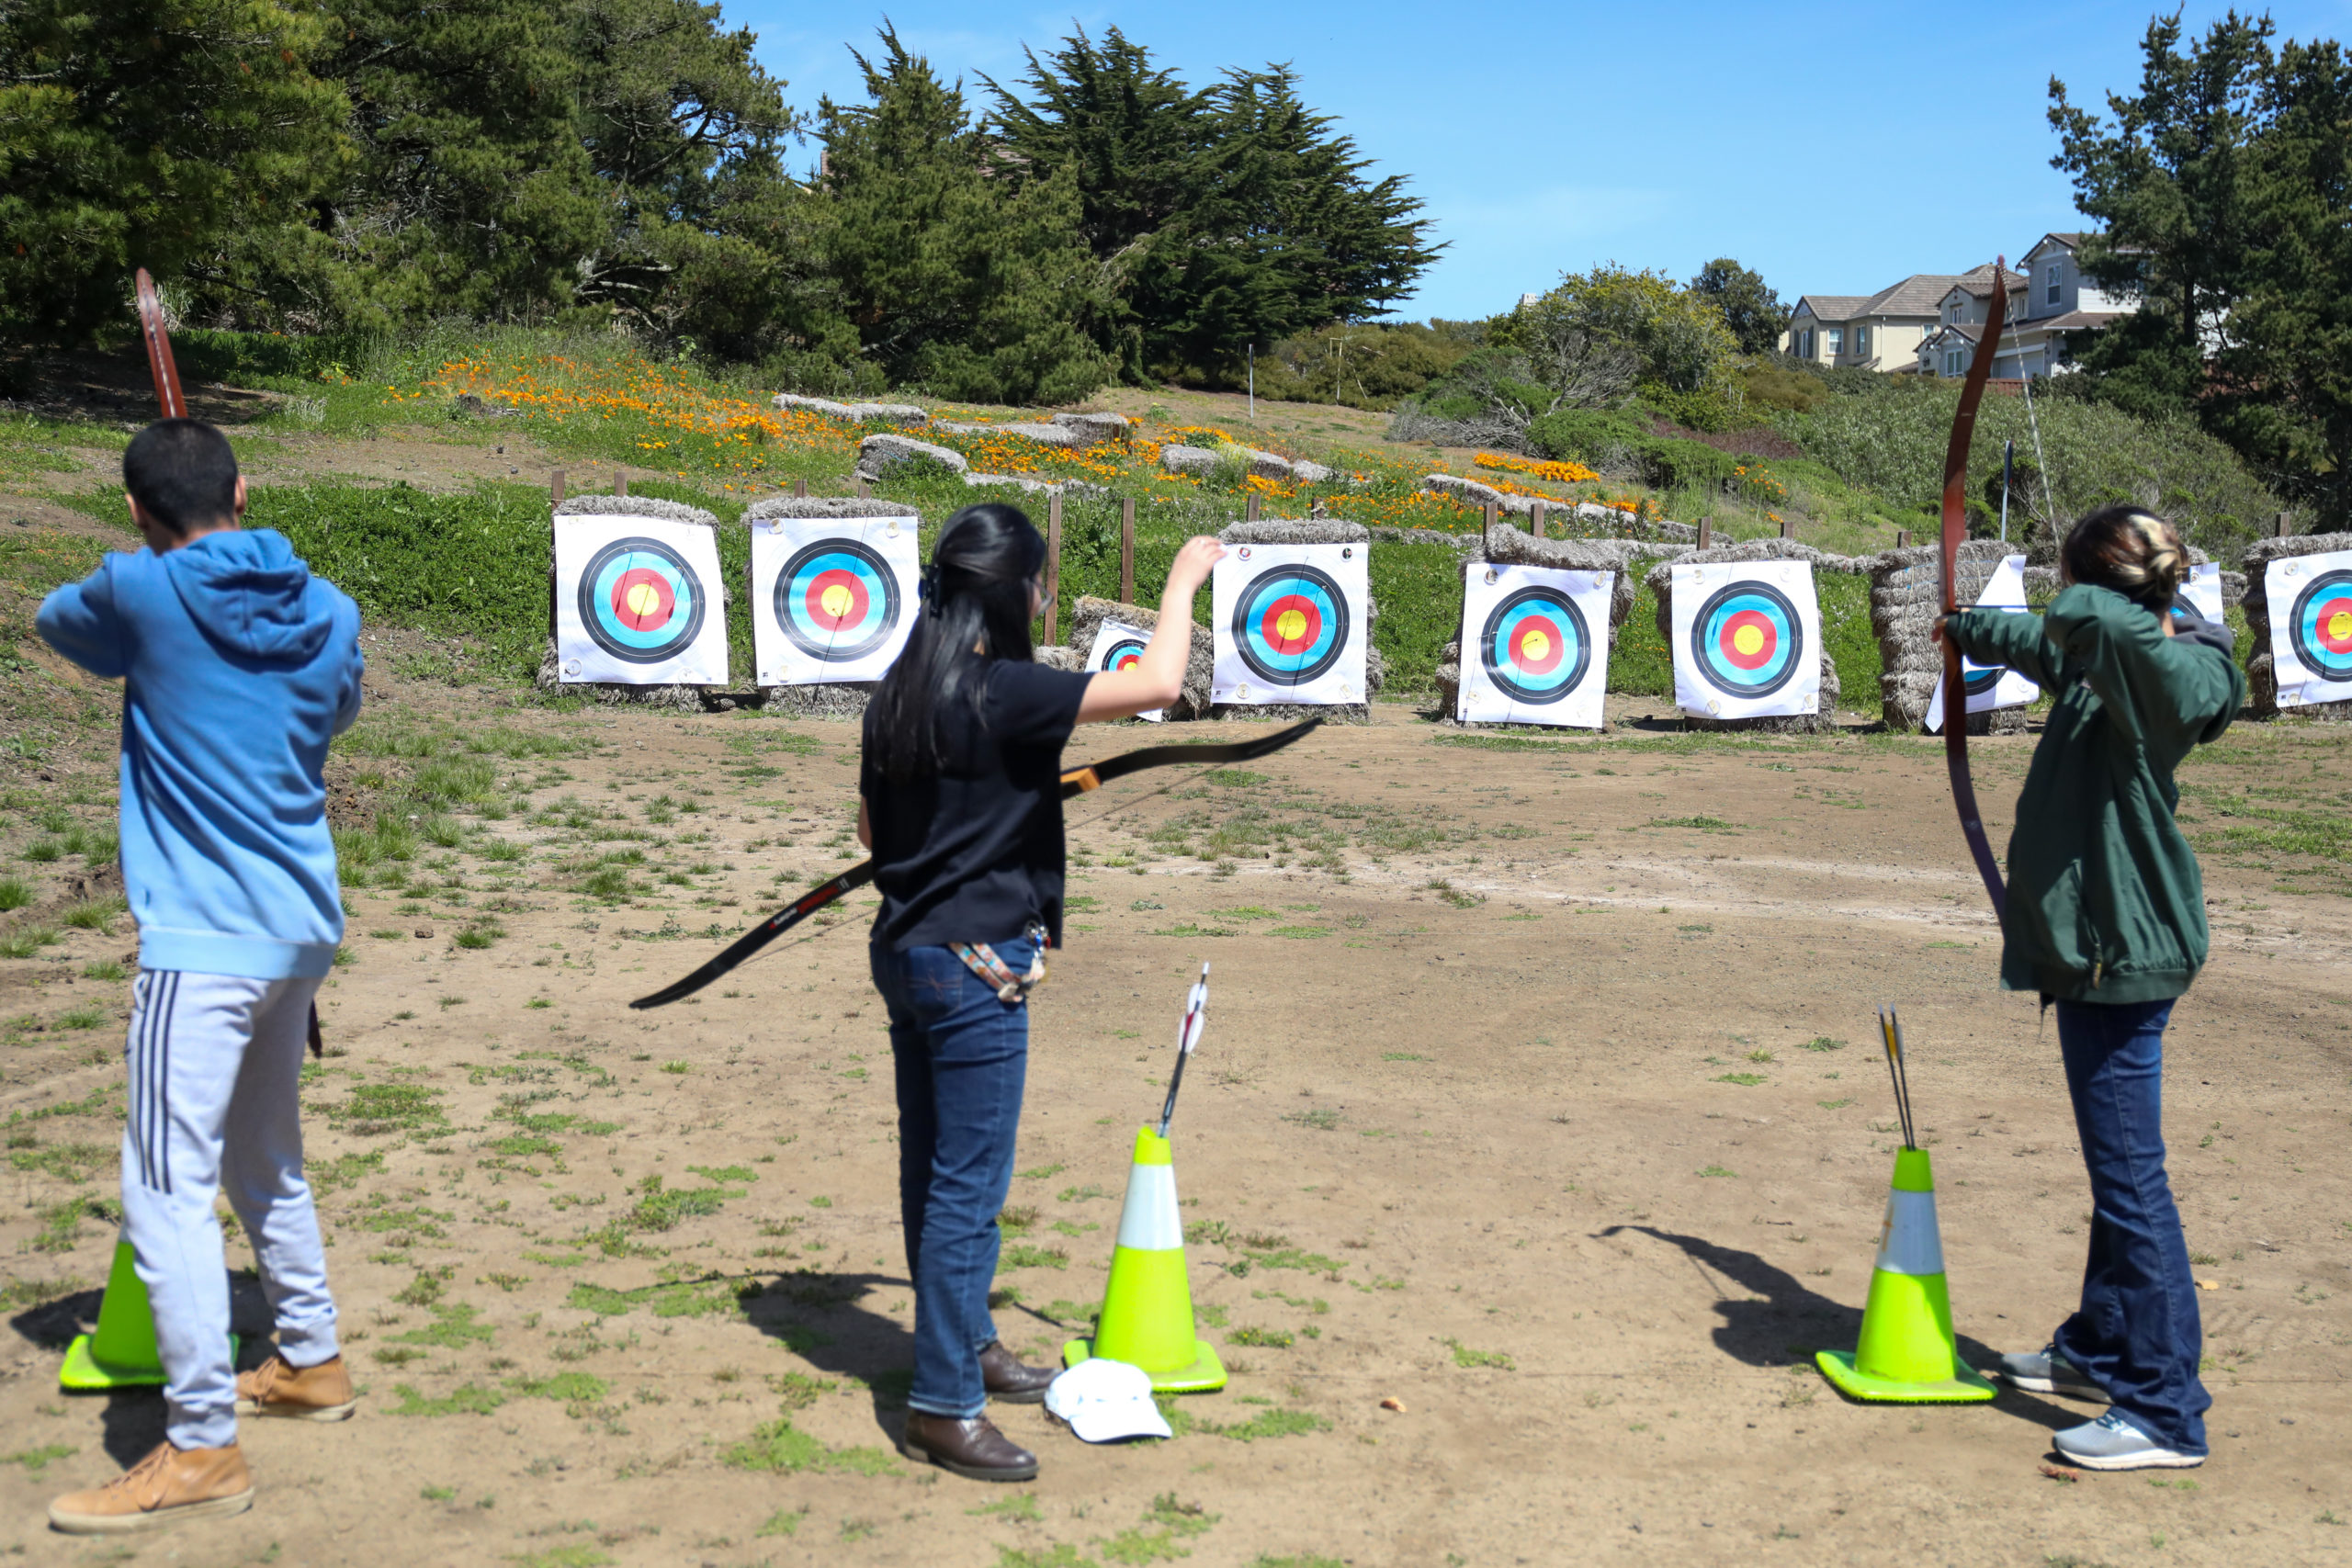 Archery students prep for their next target at Skyline College on April 25.